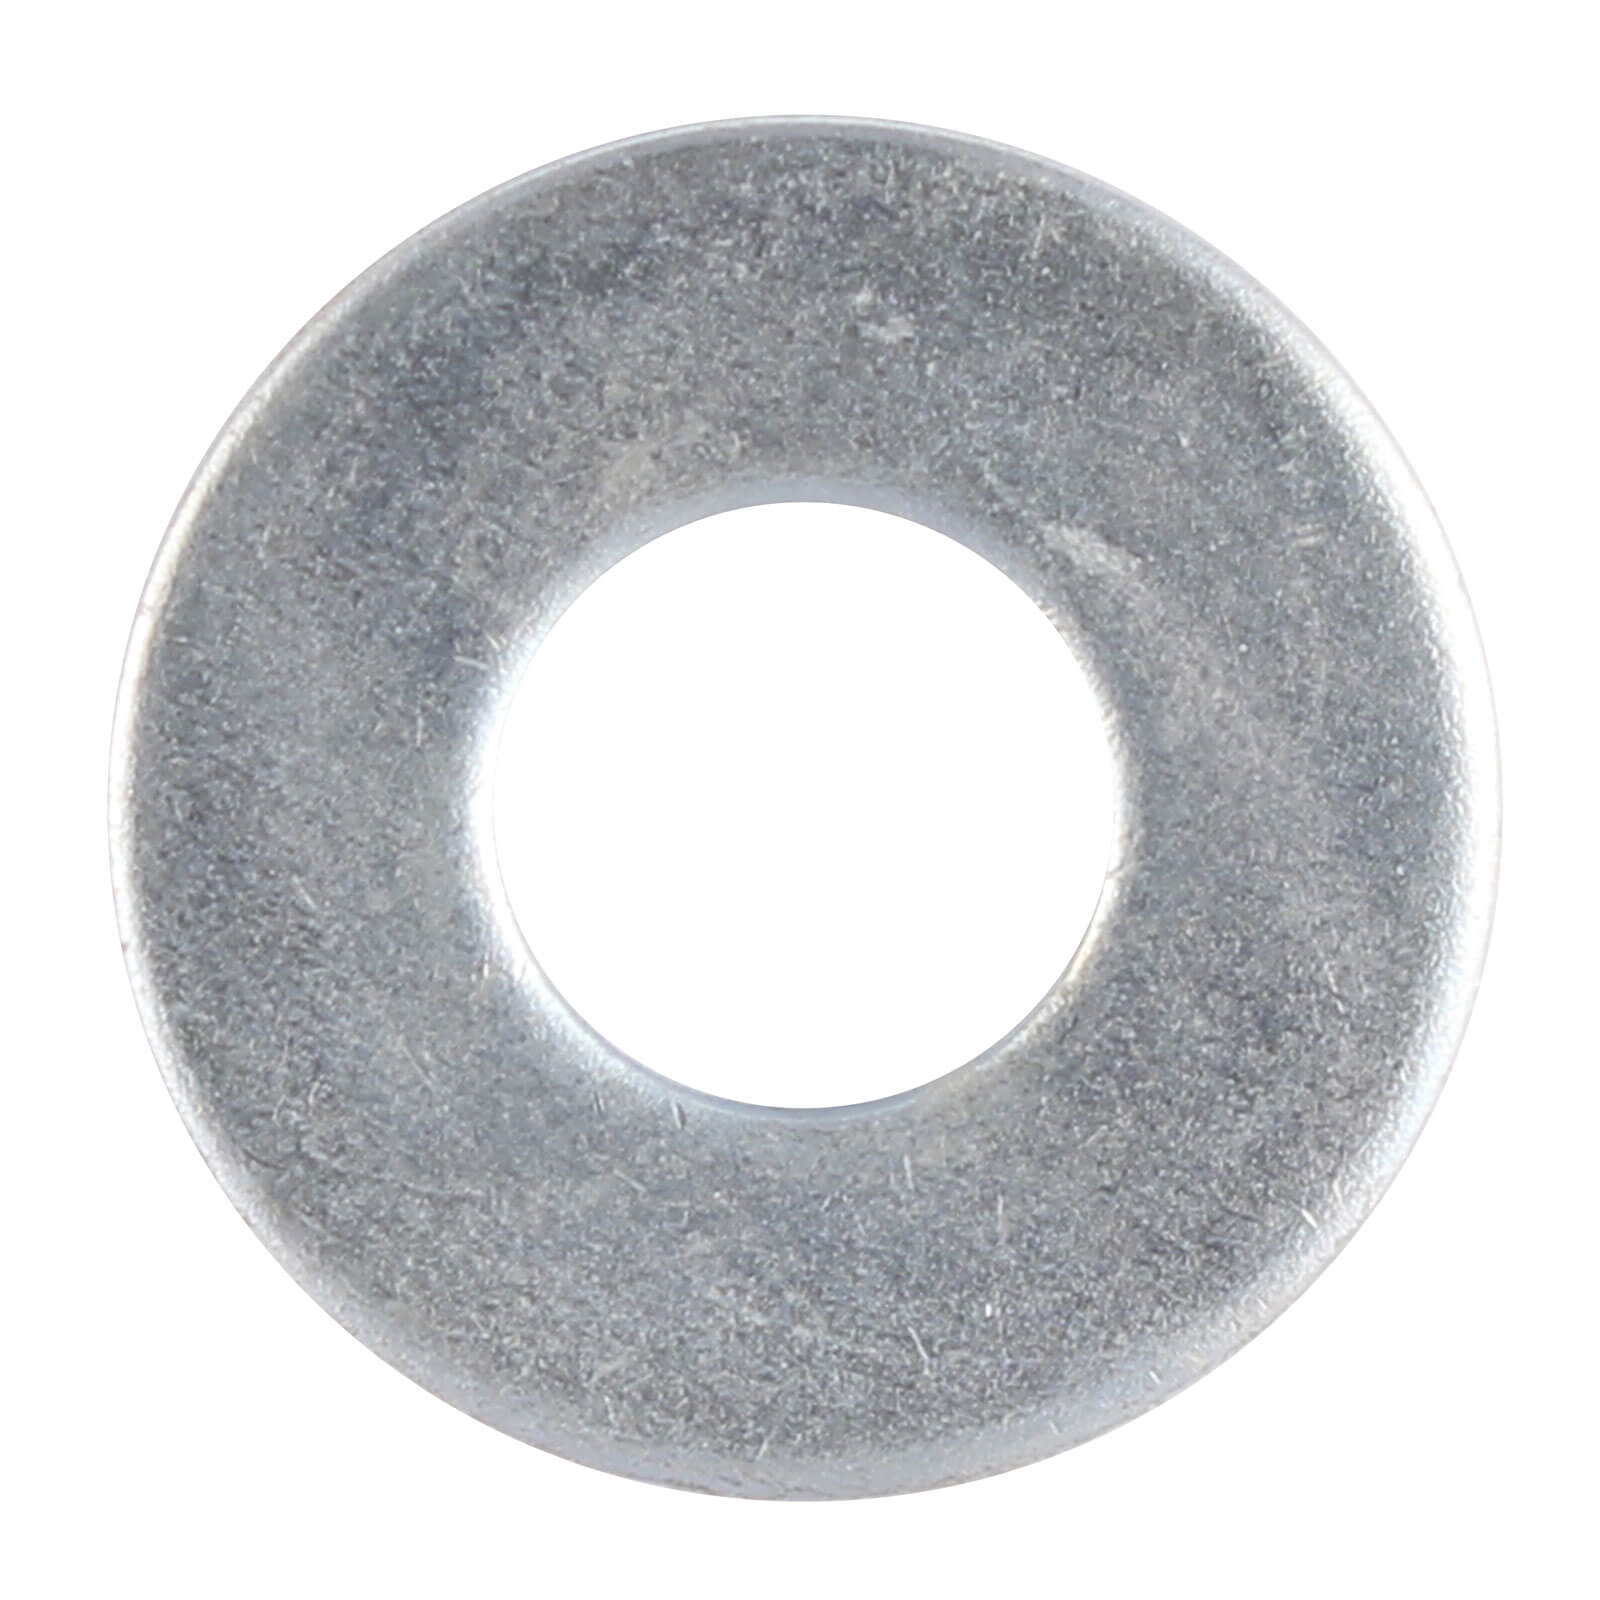 Photo of Washer Stainless Steel 10mm Pack Of 20